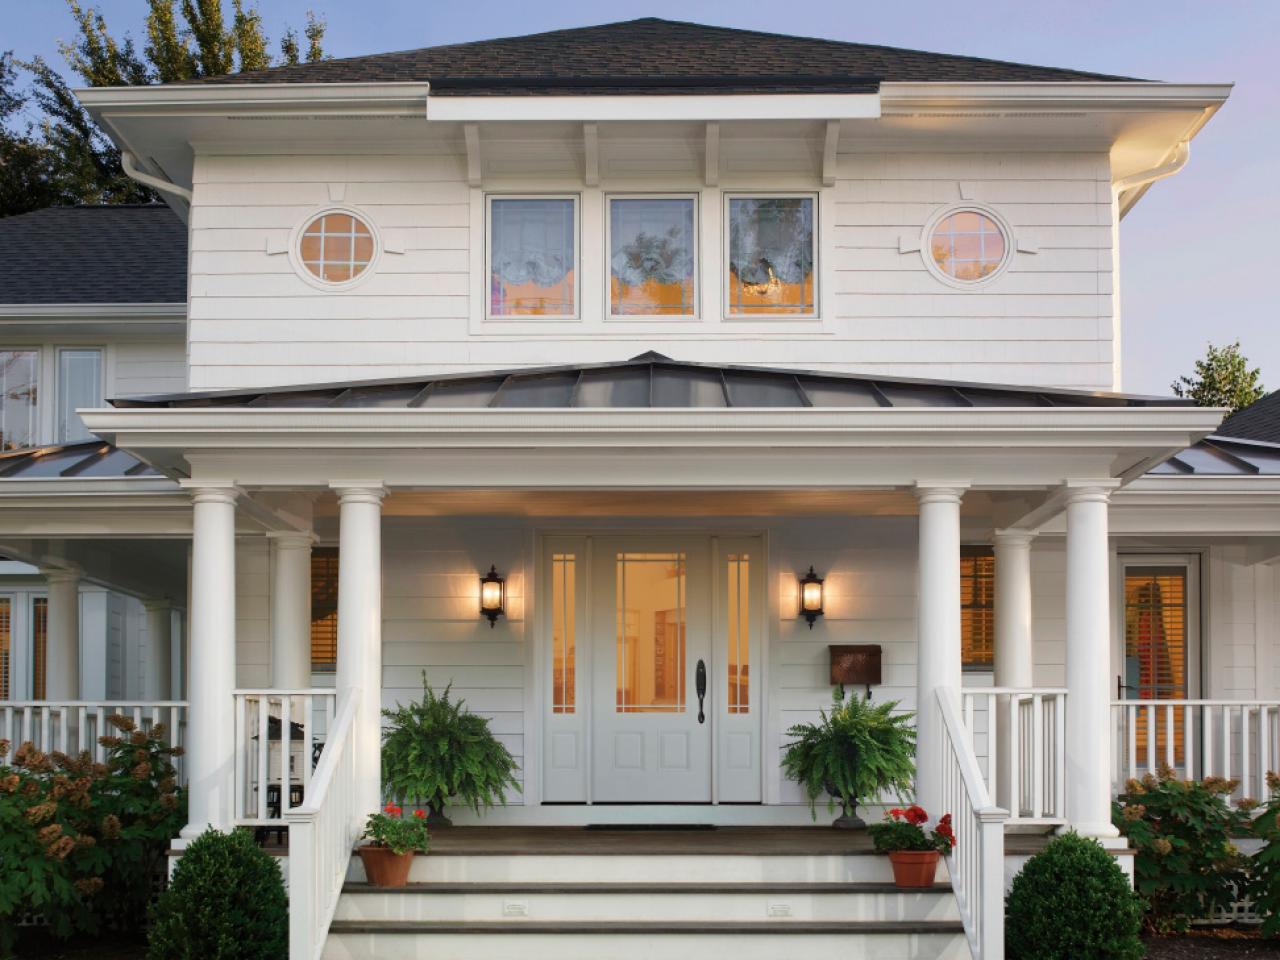 How to Choose a Front Door Color for Your Brick House